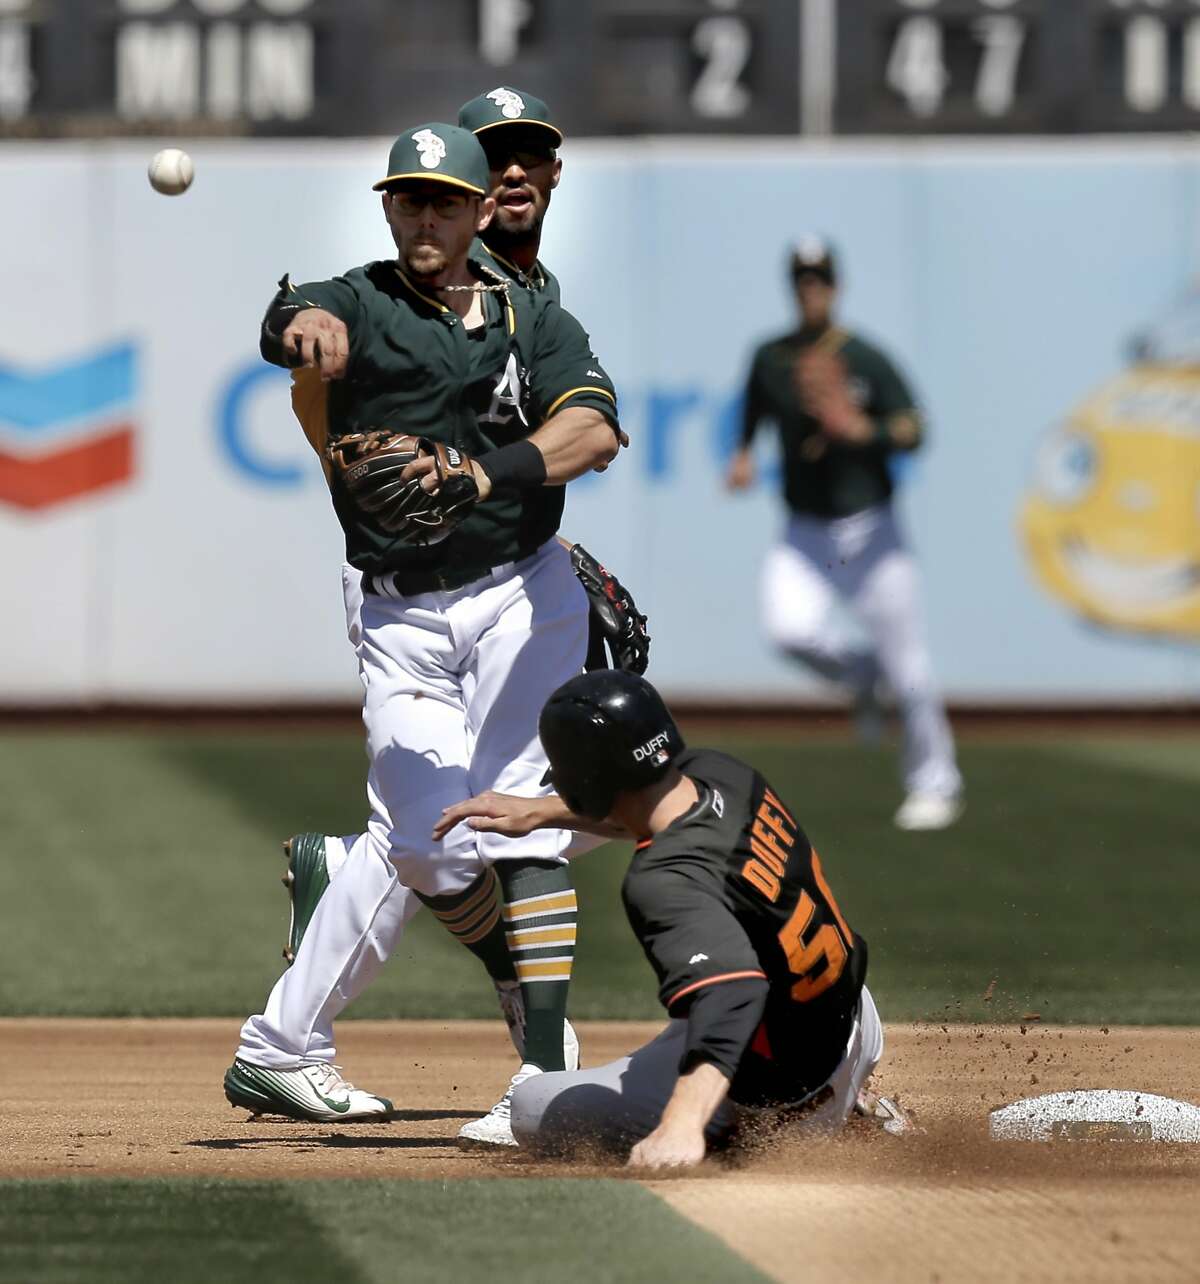 A's Eric Sogard, turns a double play forcing Matt Duffy at second base and getting Angel Pagan at first base in the 1st inning, as the Oakland Athletics take on the San Francisco Giants in of game three of the Bay Bridge Series at O.co Coliseum in Oakland, Calif., as seen on Sat.. April 4, 2015.